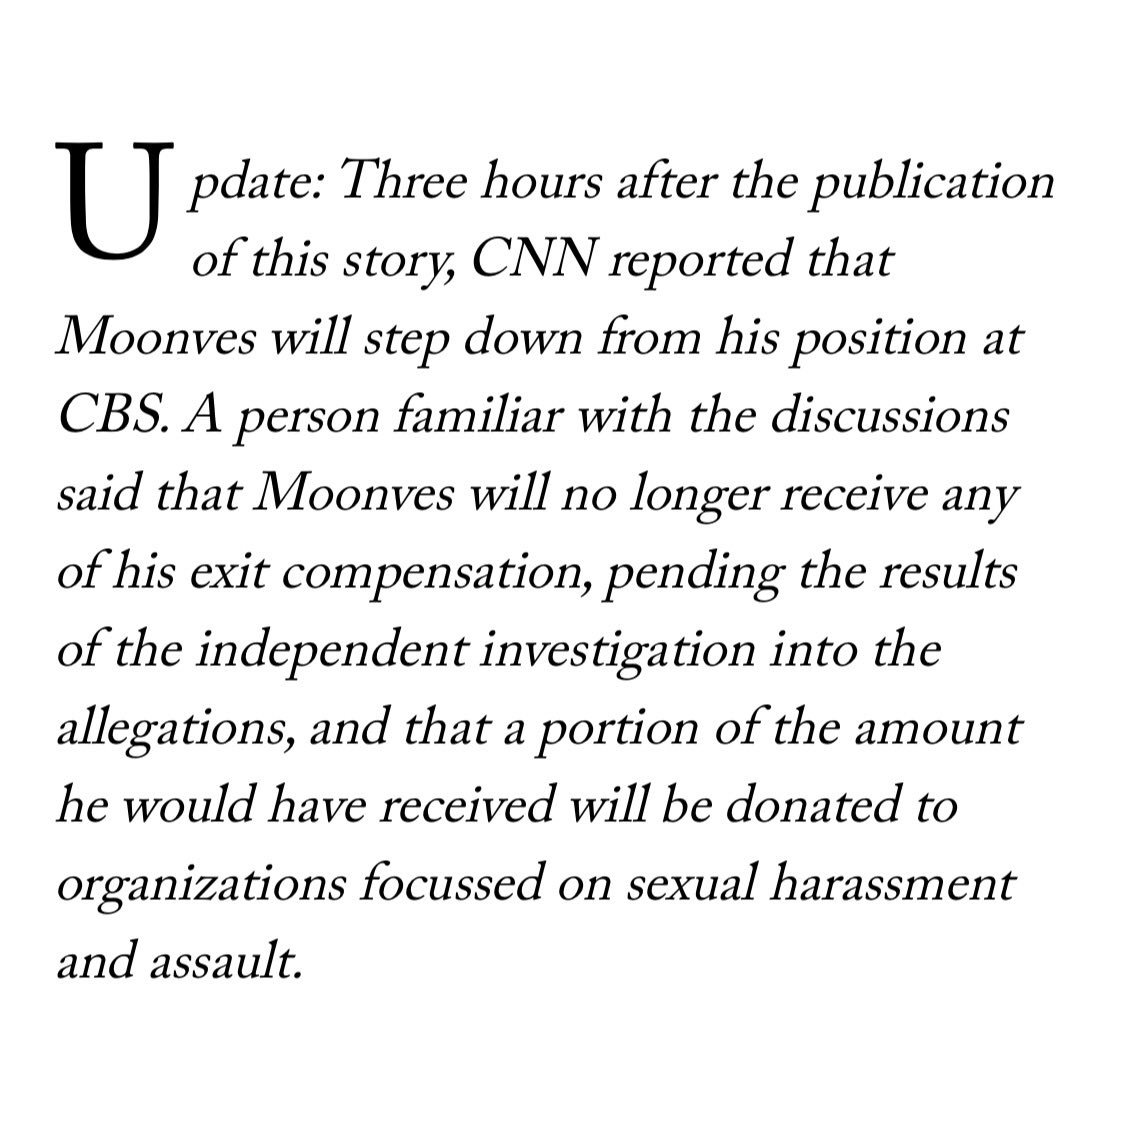 14. Update per  @RonanFarrow  https://www.newyorker.com/news/news-desk/as-leslie-moonves-negotiates-his-exit-from-cbs-women-raise-new-assault-and-harassment-claims